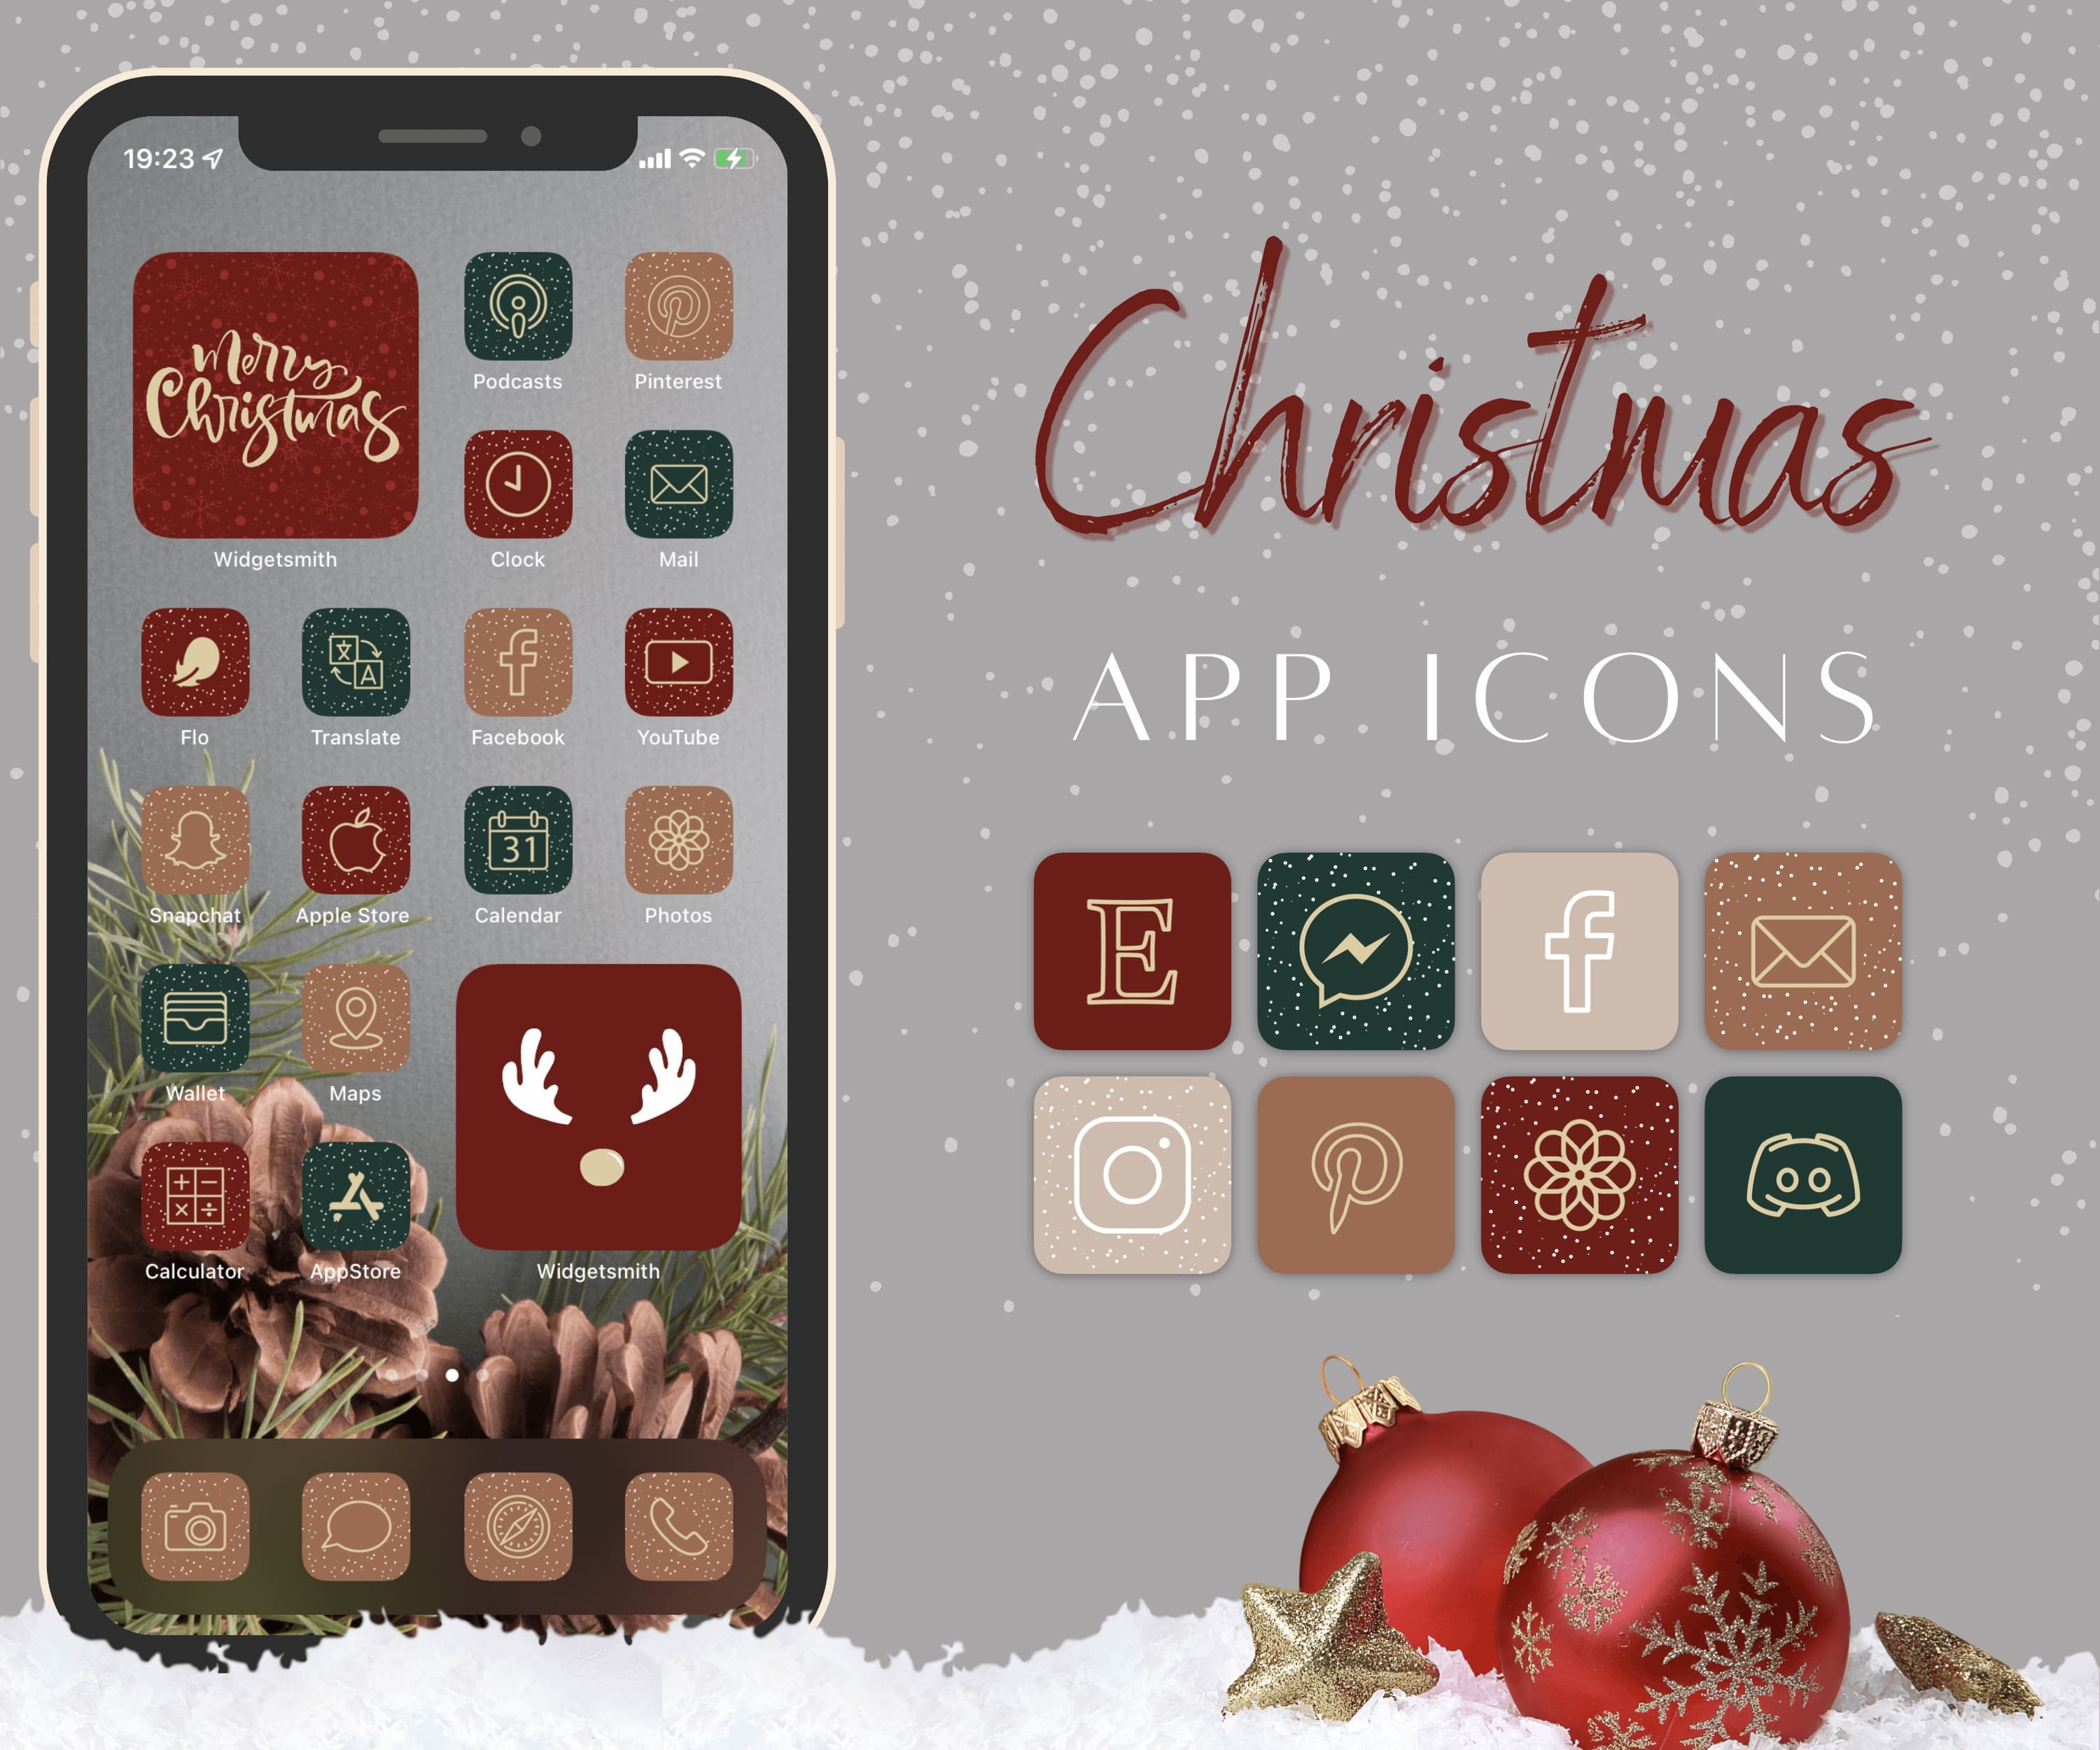 900+ Best Christmas Wallpapers ideas in 2023  christmas wallpaper,  christmas phone wallpaper, wallpaper iphone christmas